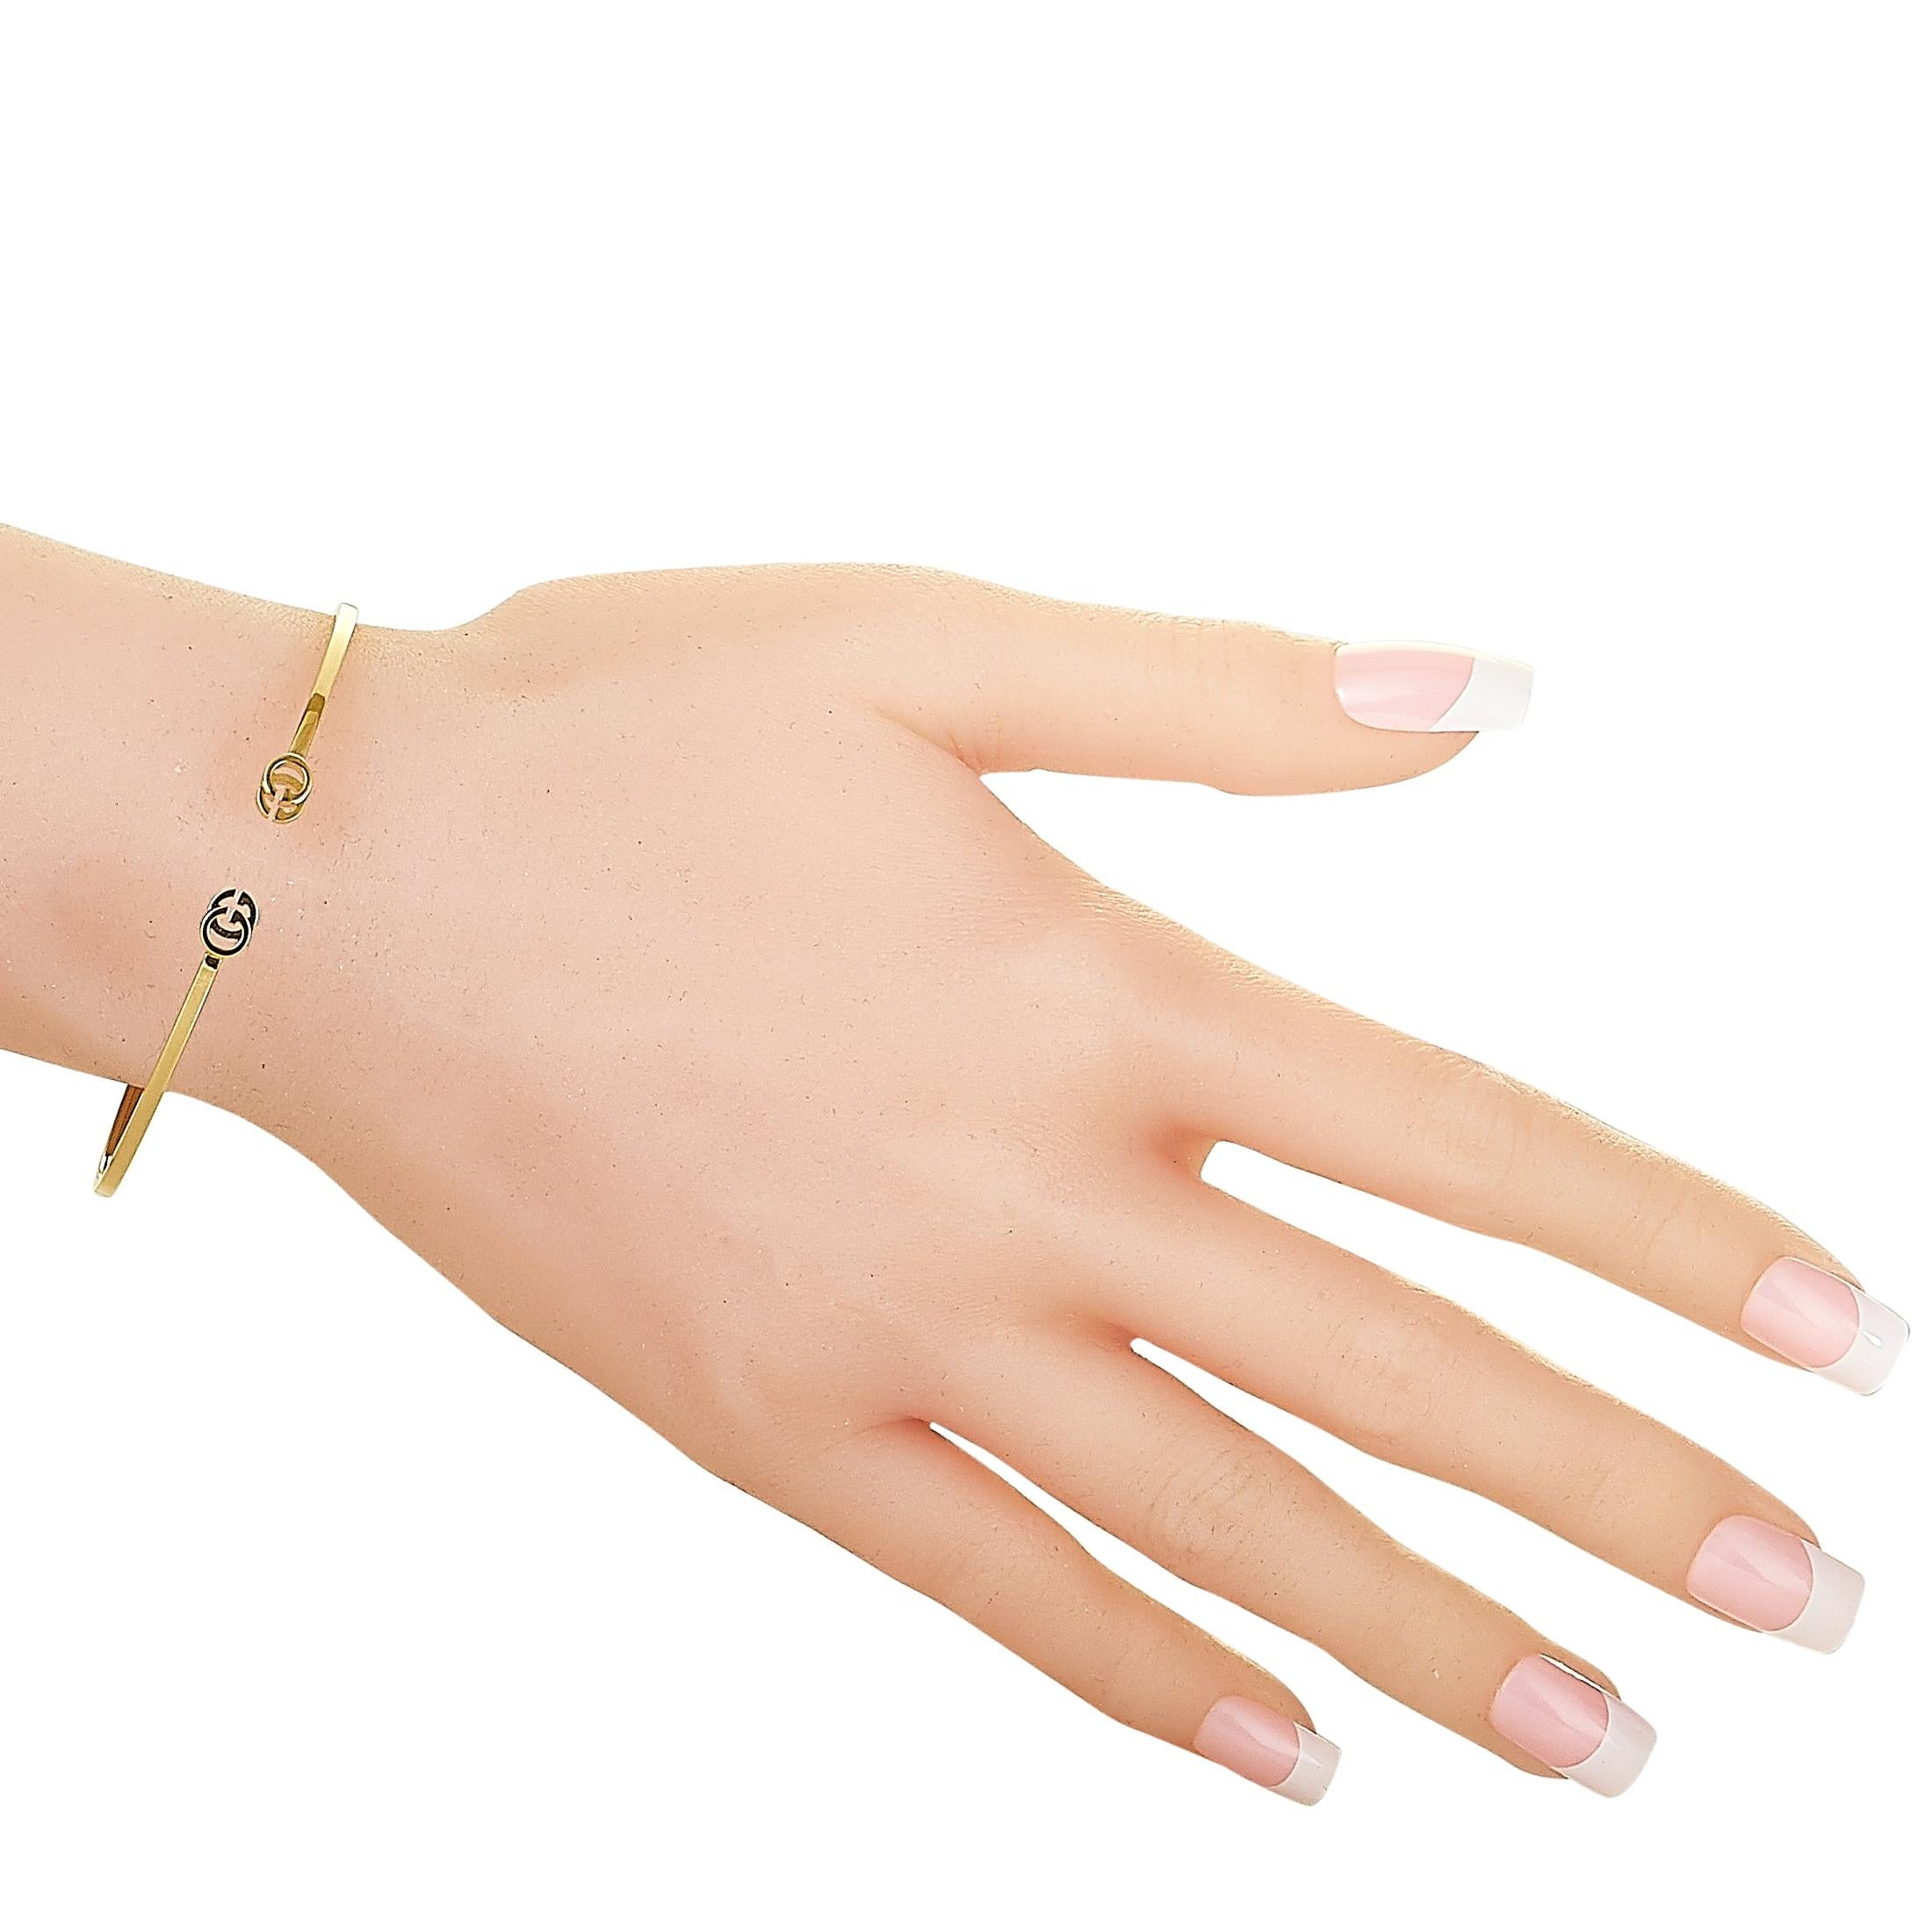 The Gucci “GG Running” bracelet is crafted from 18K yellow gold and weighs 4 grams, measuring 7.50” in length.
 
 The bracelet is offered in brand new condition and includes the manufacturer’s box and papers.